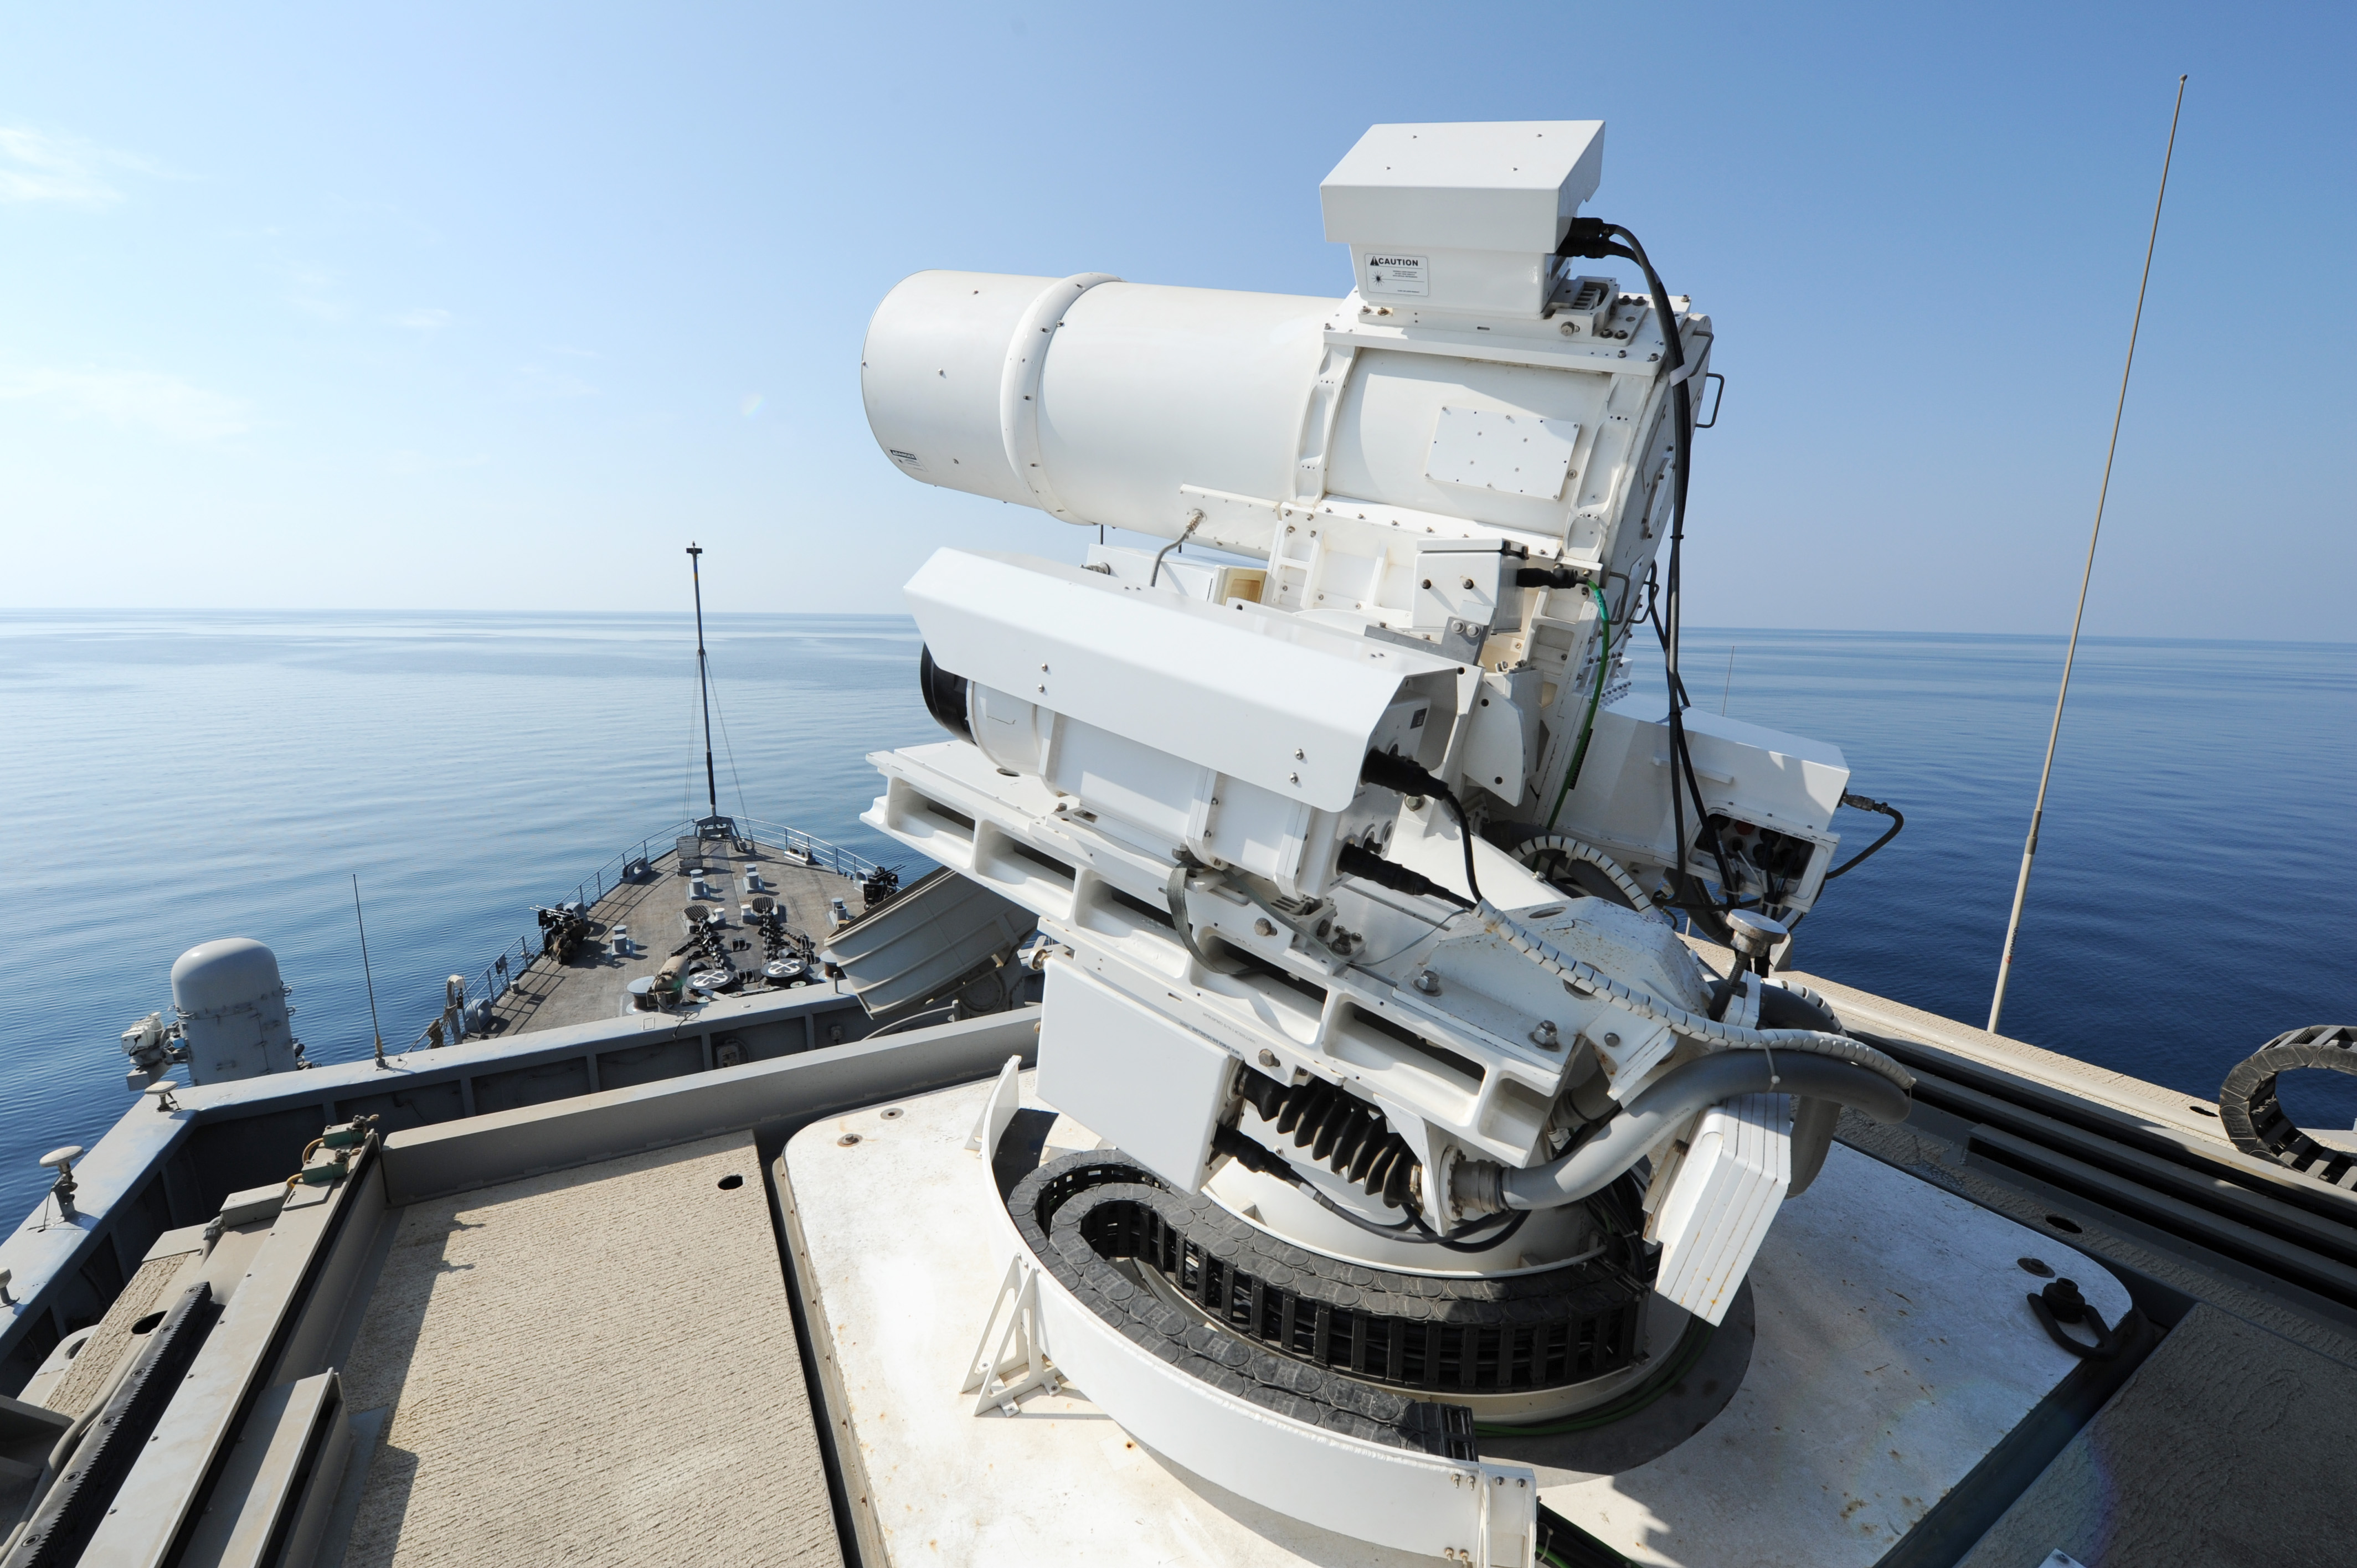 The Afloat Forward Staging Base (Interim) USS Ponce (ASB(I) 15) conducts an operational demonstration of the Office of Naval Research (ONR)-sponsored Laser Weapon System (LaWS) while deployed to the Arabian Gulf on November 17, 2014. US Navy photo.